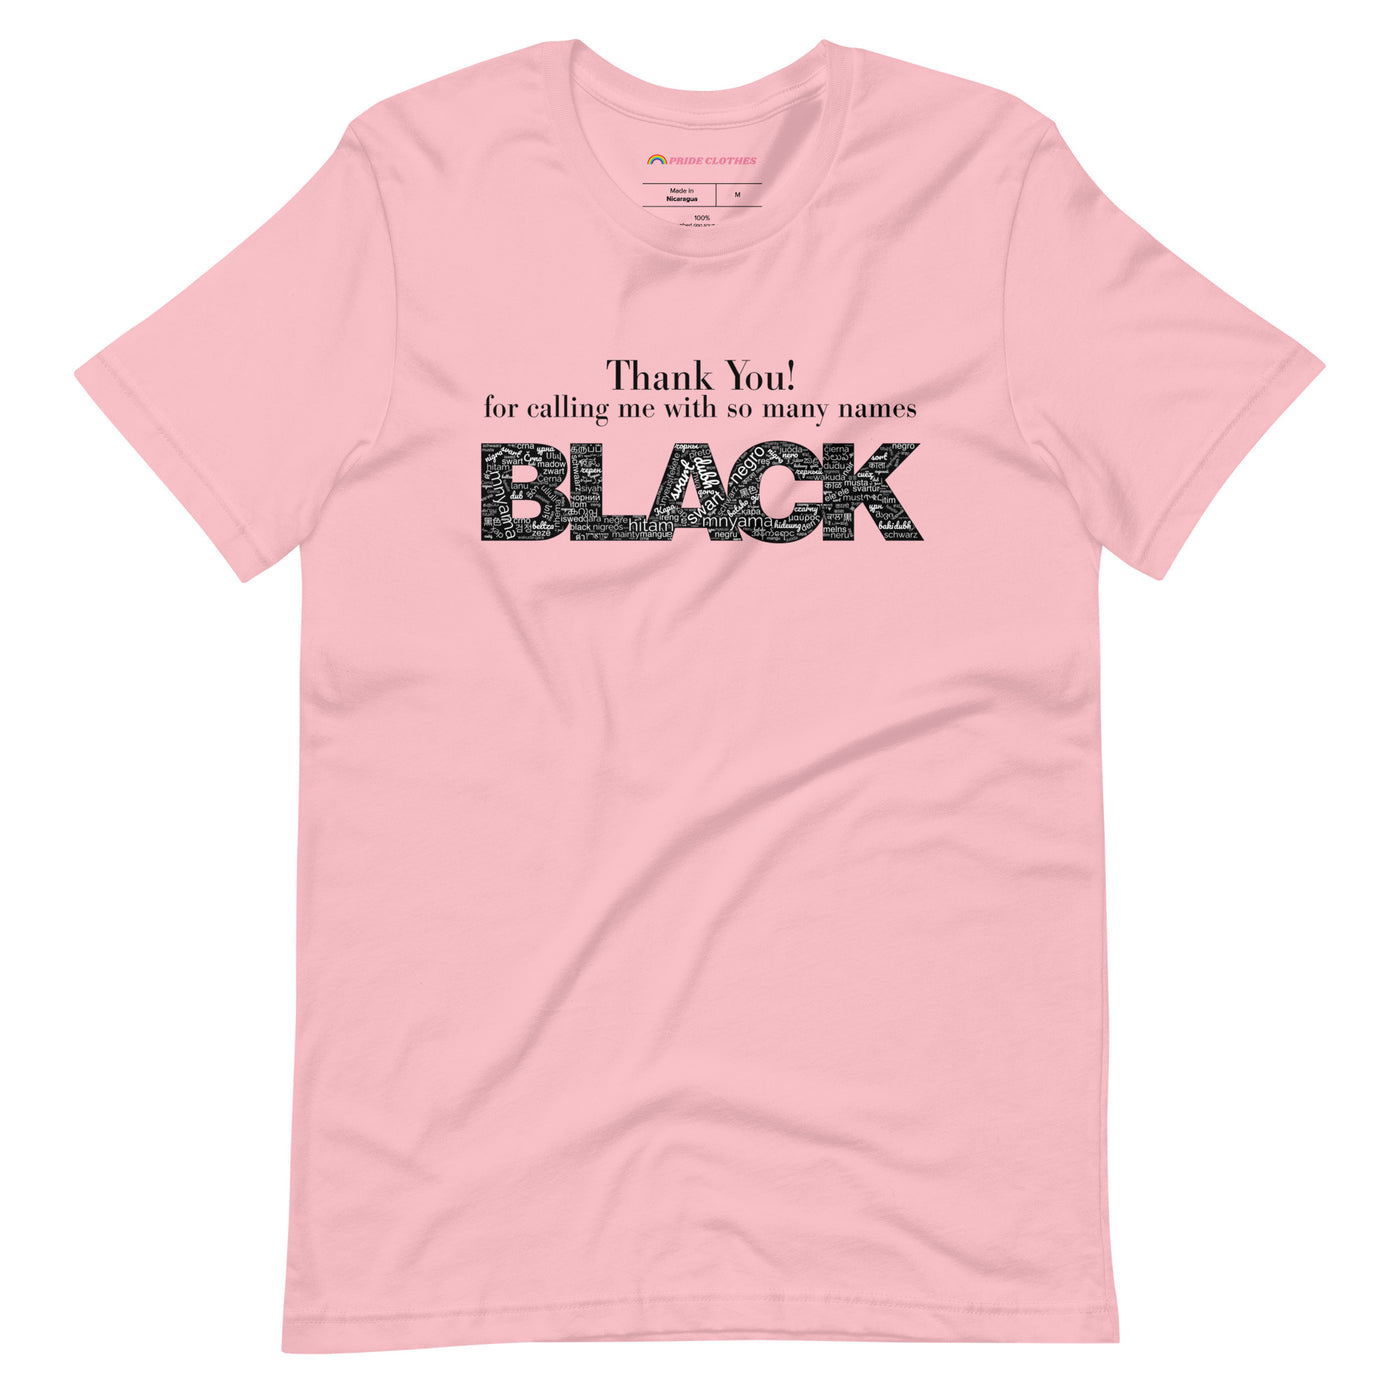 Pride Clothes - Thank You! Proud To Be Black TShirt - Pink